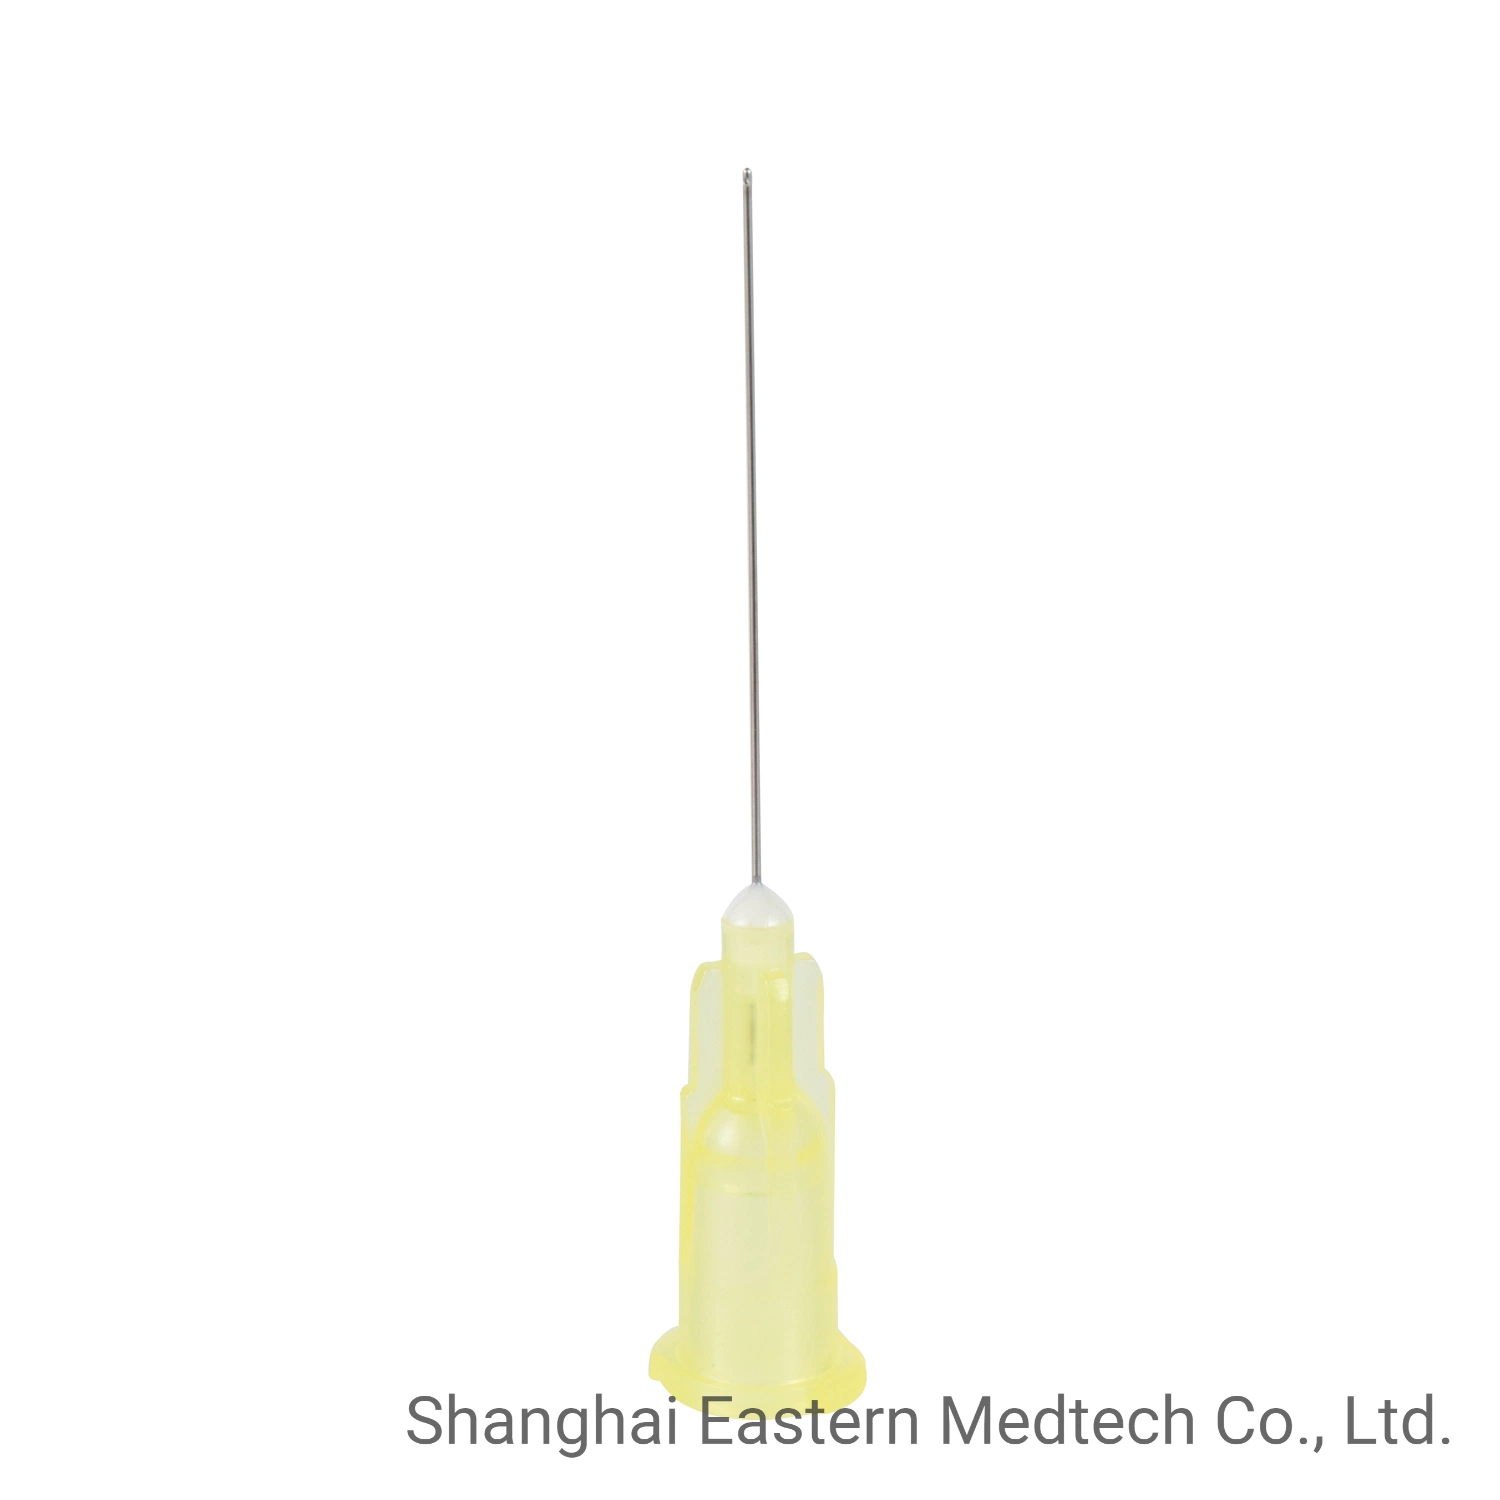 Medical Device Disposable for Dentist Use 23G/25g/ 27g / 30g Endo Irrigation Needle Tip Dental Application/Irrigation Needle